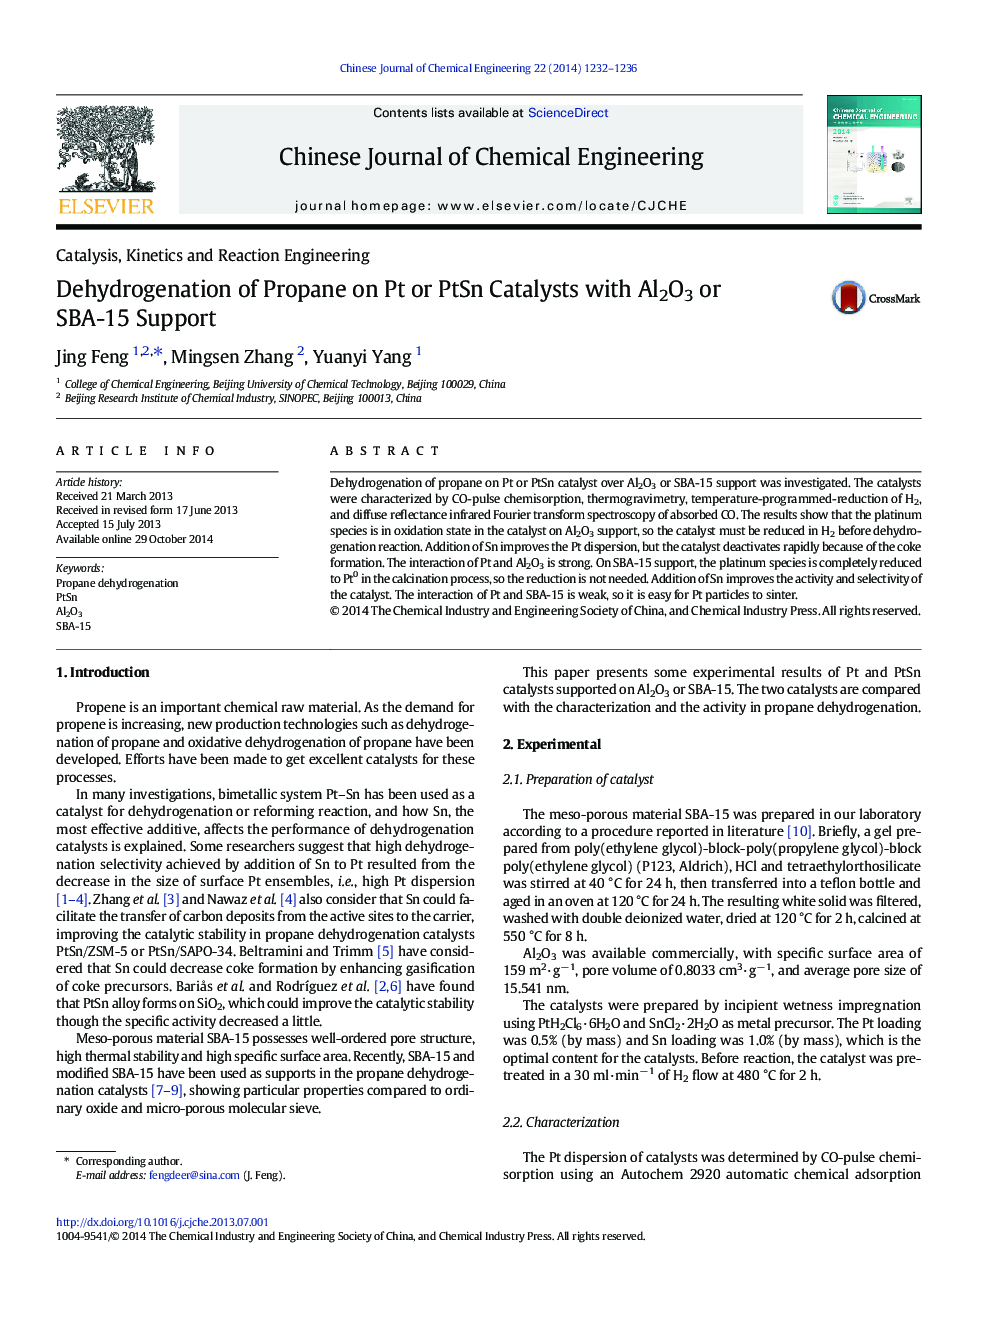 Dehydrogenation of Propane on Pt or PtSn Catalysts with Al2O3 or SBA-15 Support